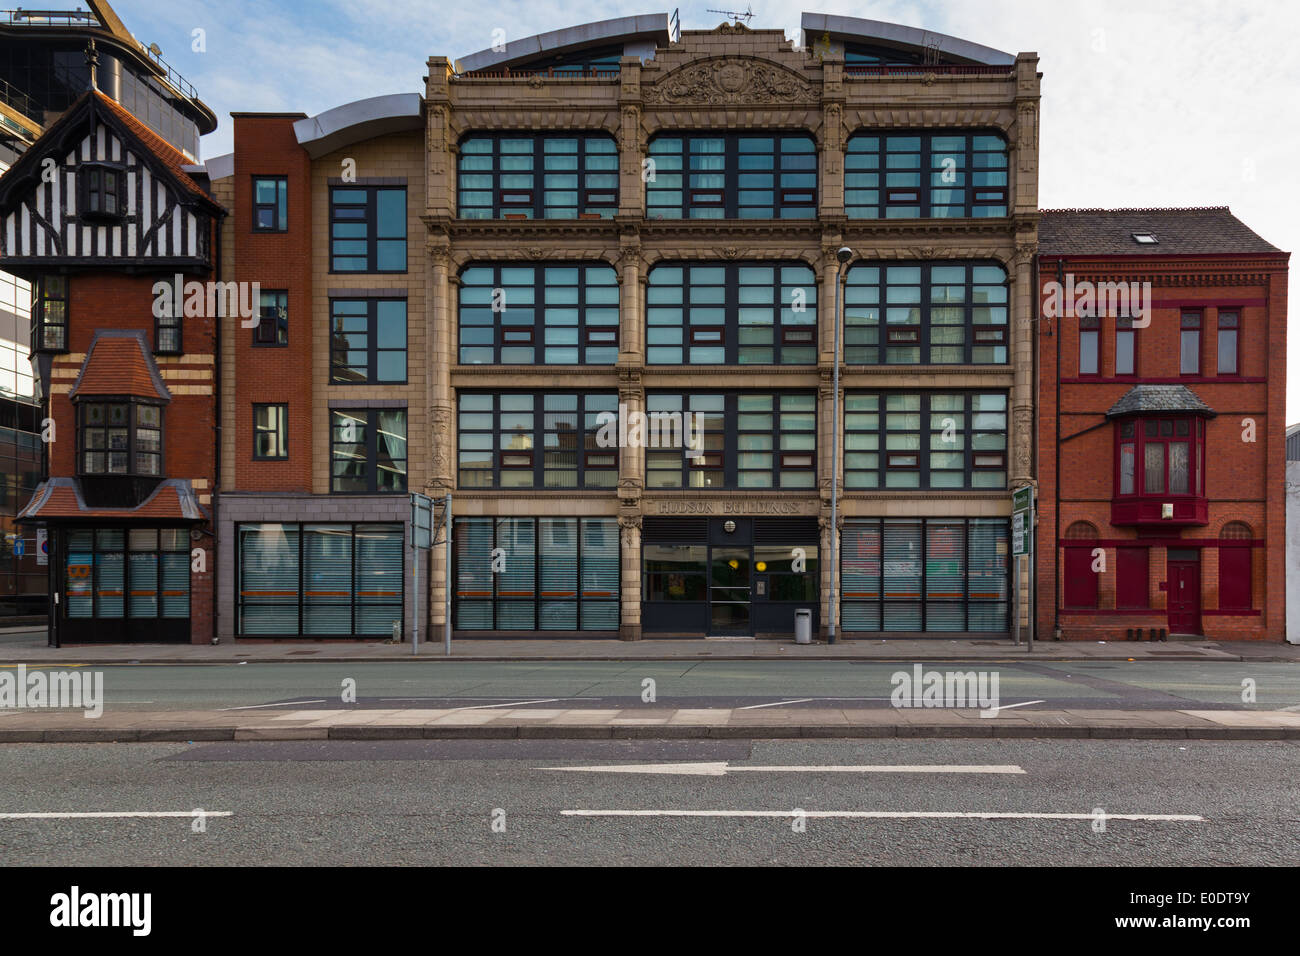 Contrasts in Architecture at Gt Ancoats Street, Northern Quarter, Manchester. Stock Photo